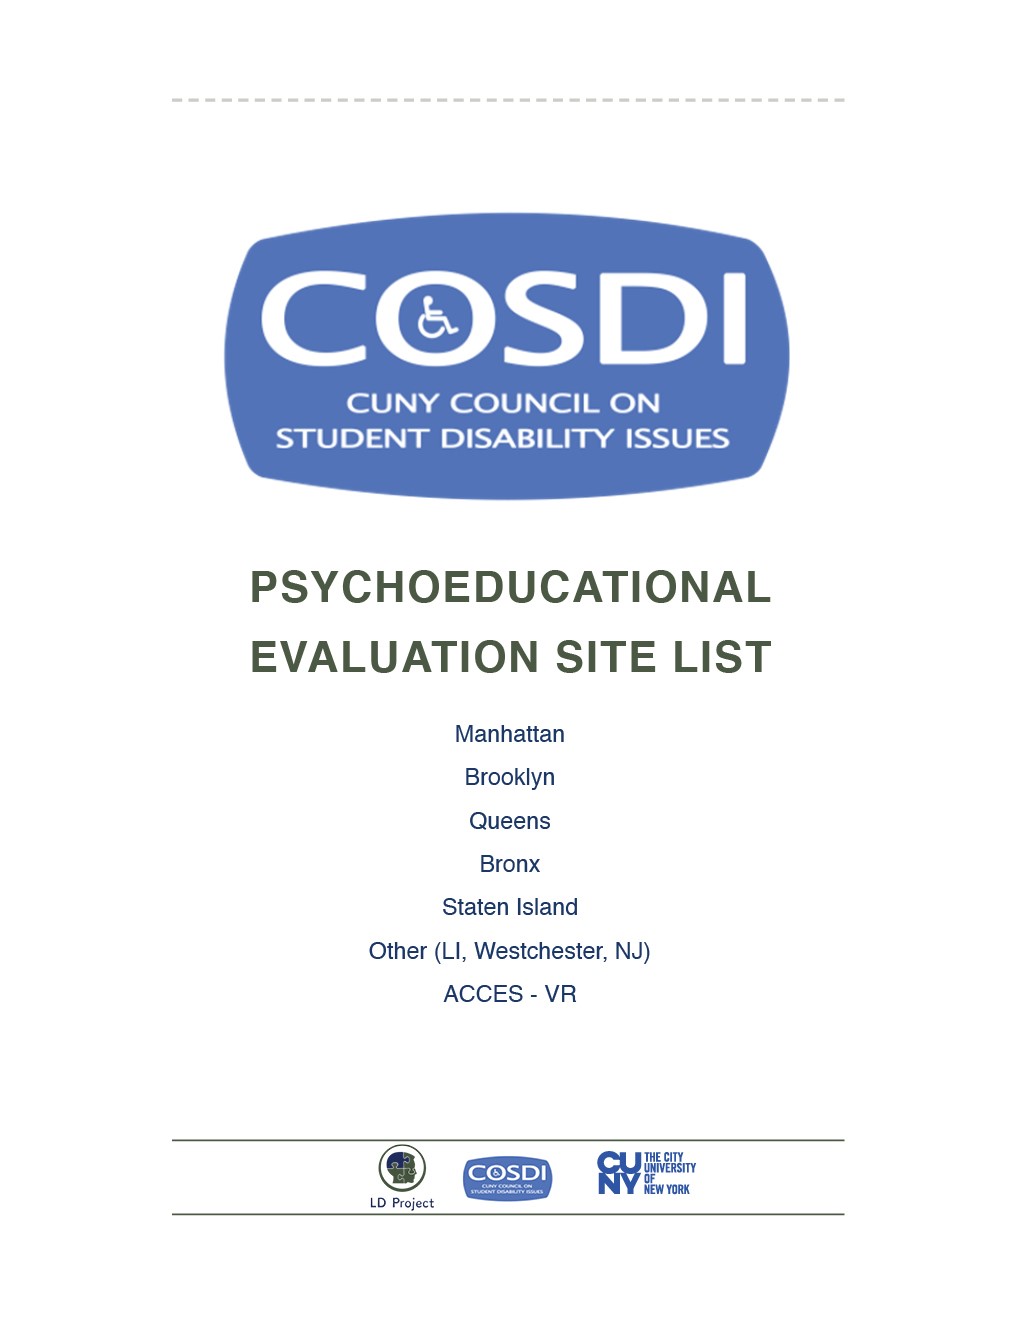 Psycho-Educational Evaluation Sire List

Spring 2021 Update

Manhattan, Brooklyn, Queens, Bronx, Staten Island, Other (LI, NY) Access-VR. 

Logos for LD Project, COSDI, CUNY